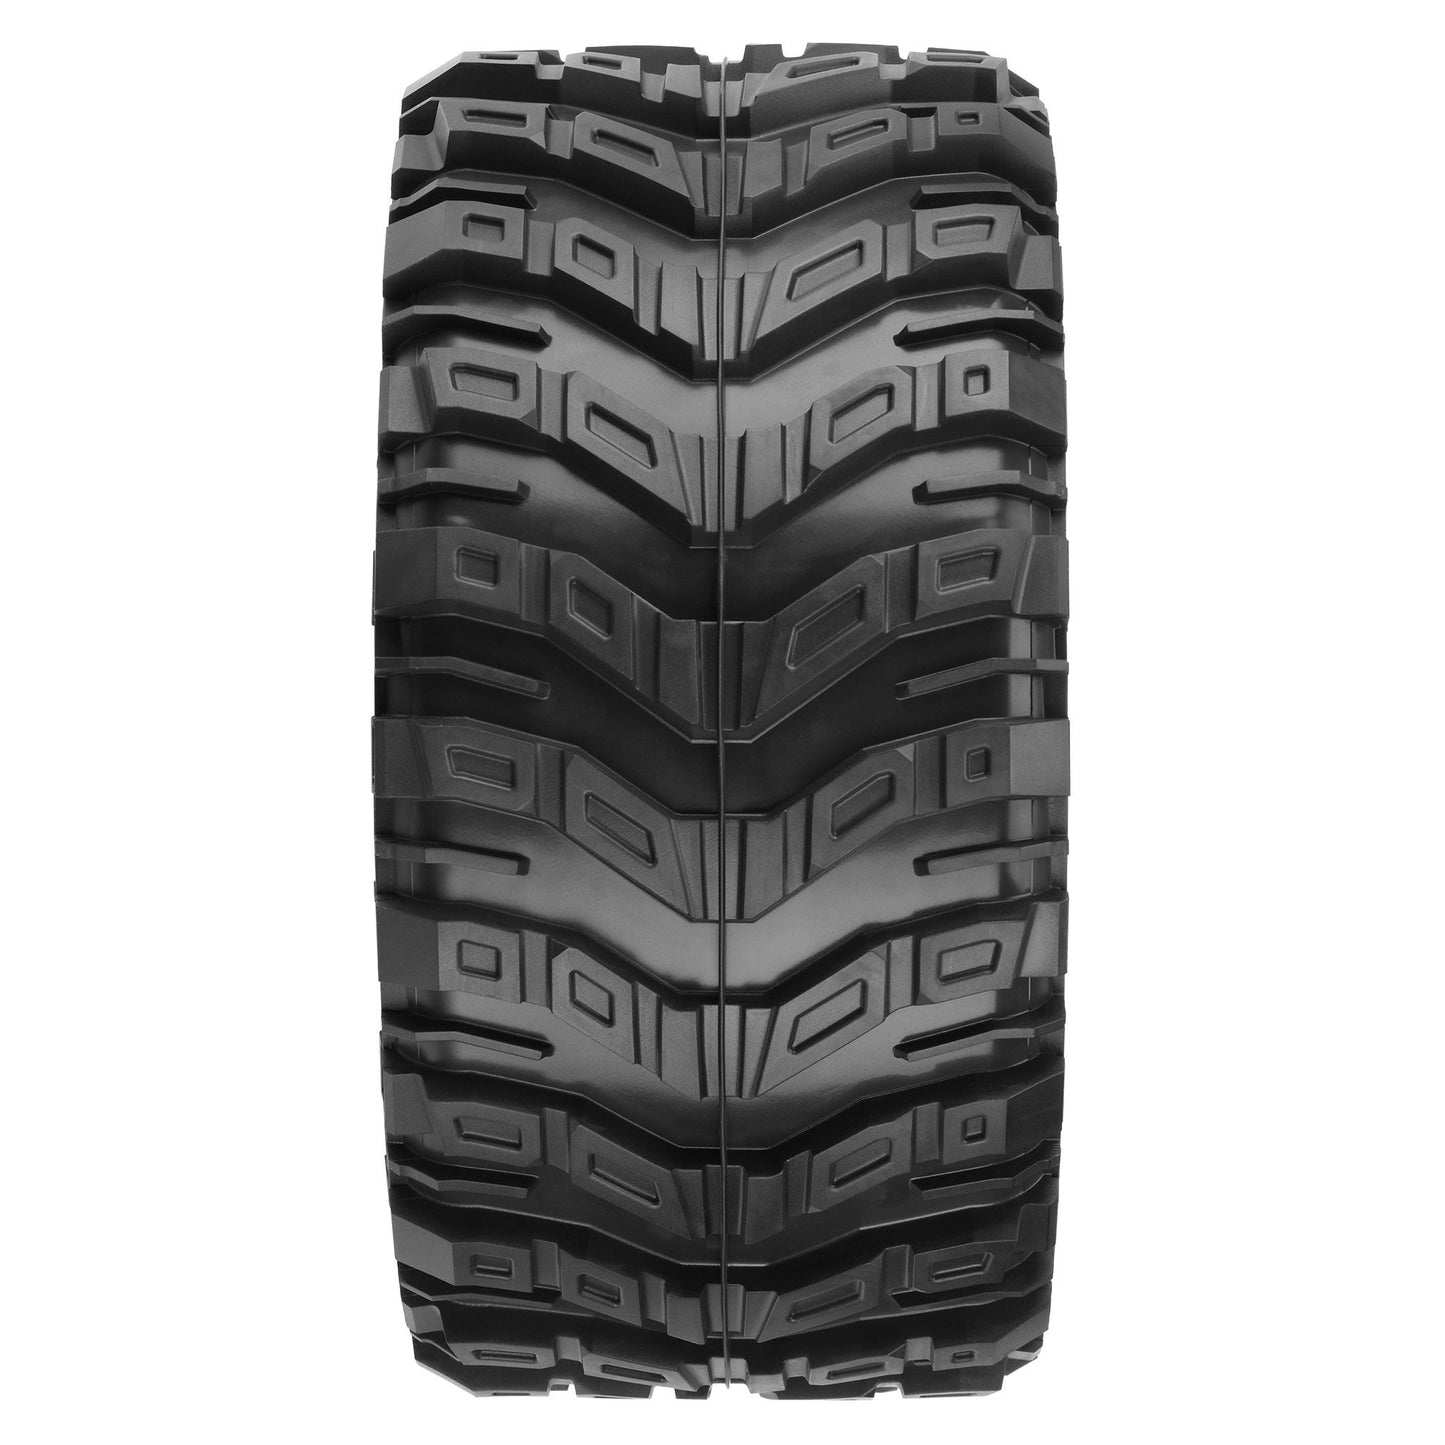 Masher X HP Tires MTD Removable Hex (2)